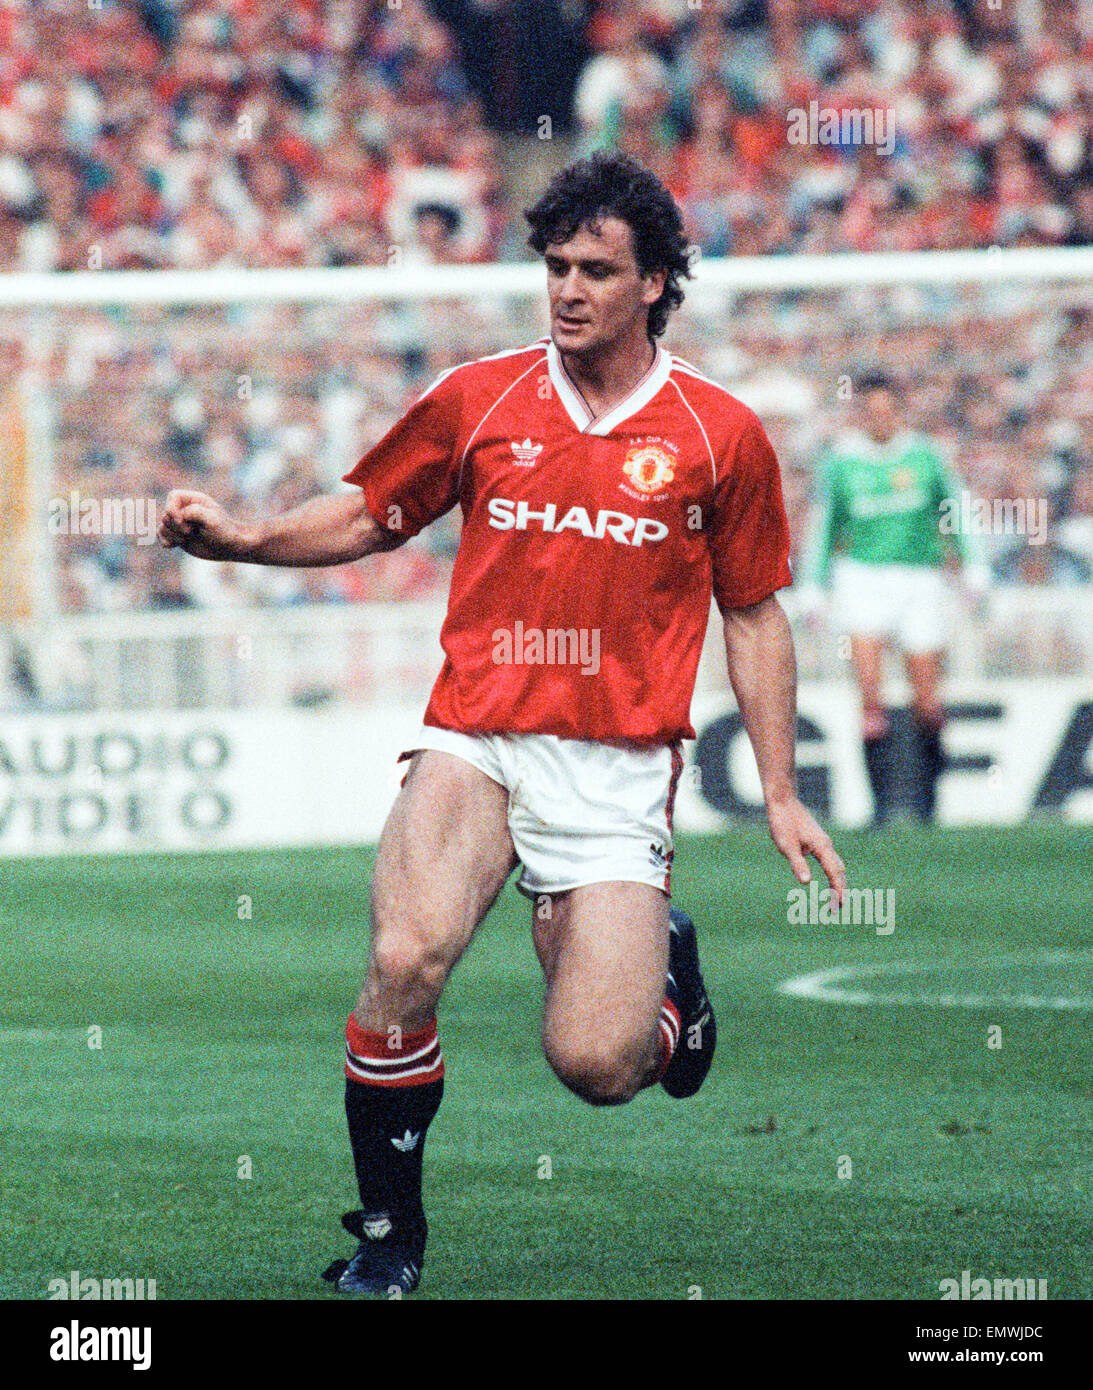 FA-Cup Finale Wiederholung im Wembley-Stadion. Manchester United 1 V Crystal Palace 0. Uniteds Mark Hughes. 17. Mai 1990. Stockfoto